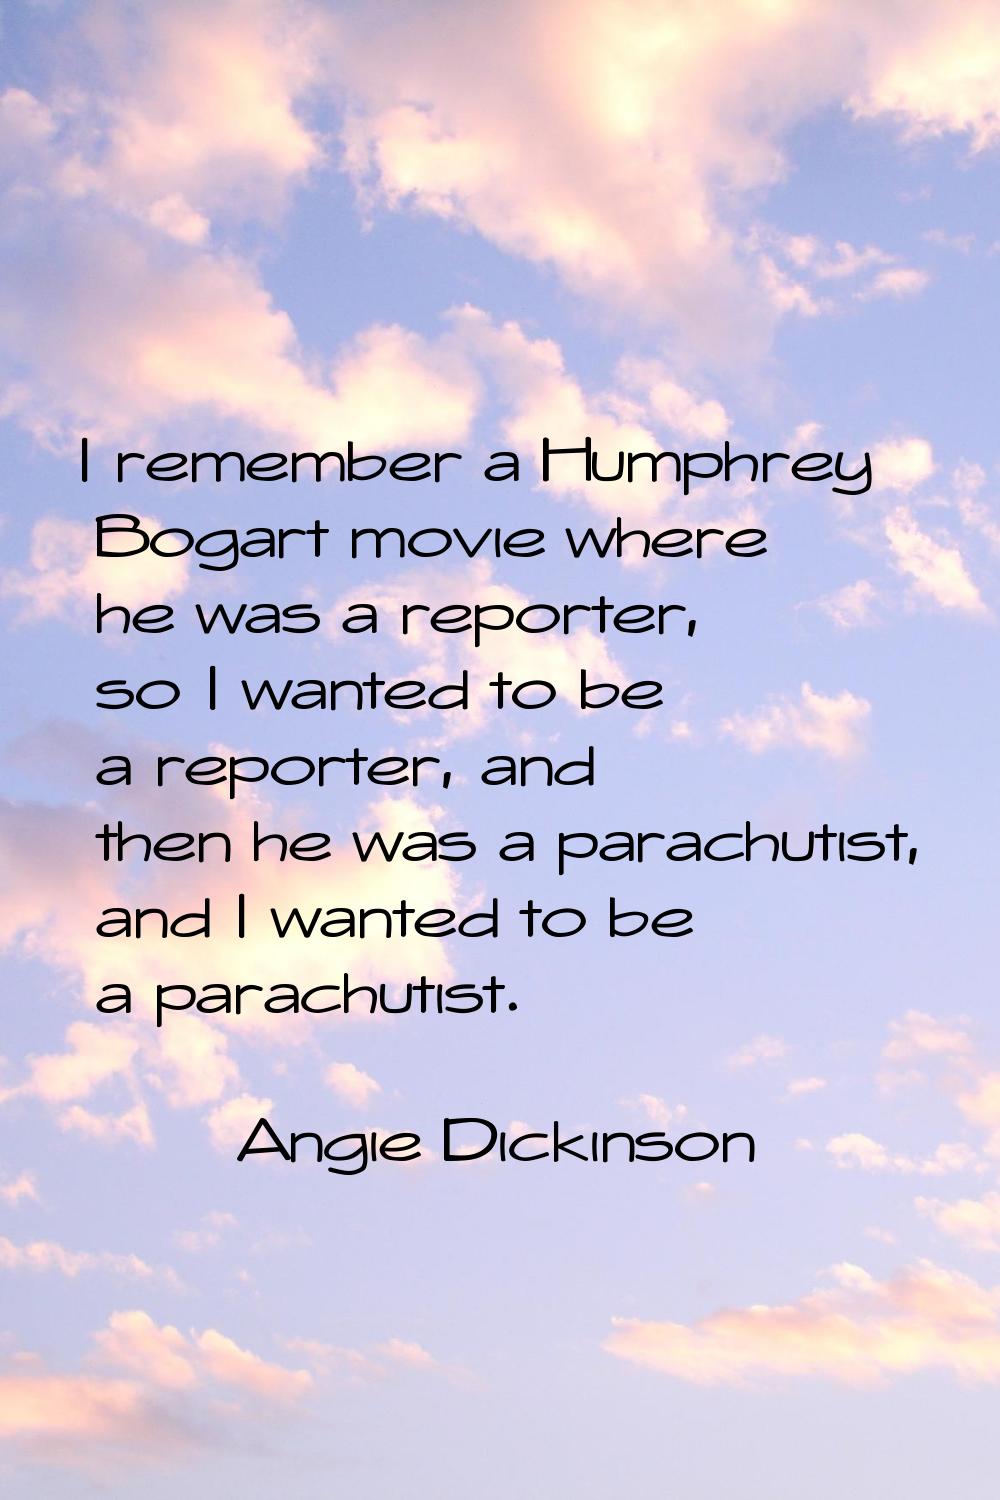 I remember a Humphrey Bogart movie where he was a reporter, so I wanted to be a reporter, and then 